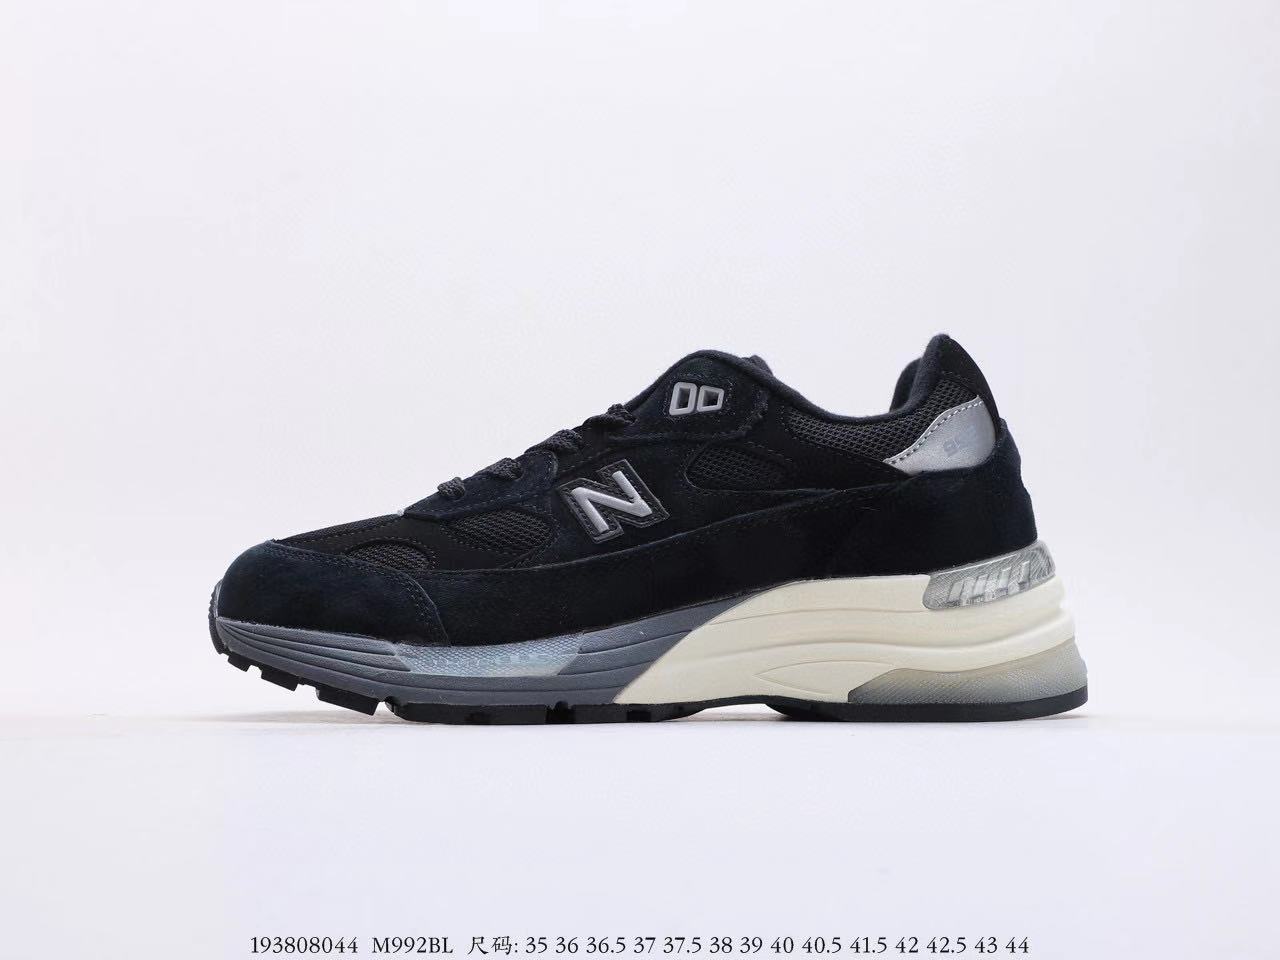 M992bl Blacknb992 Men's and women's shoes Yuan Zuhui American products run gym shoes Yu wenle jointly Retro leisure time Daddy shoes M990G